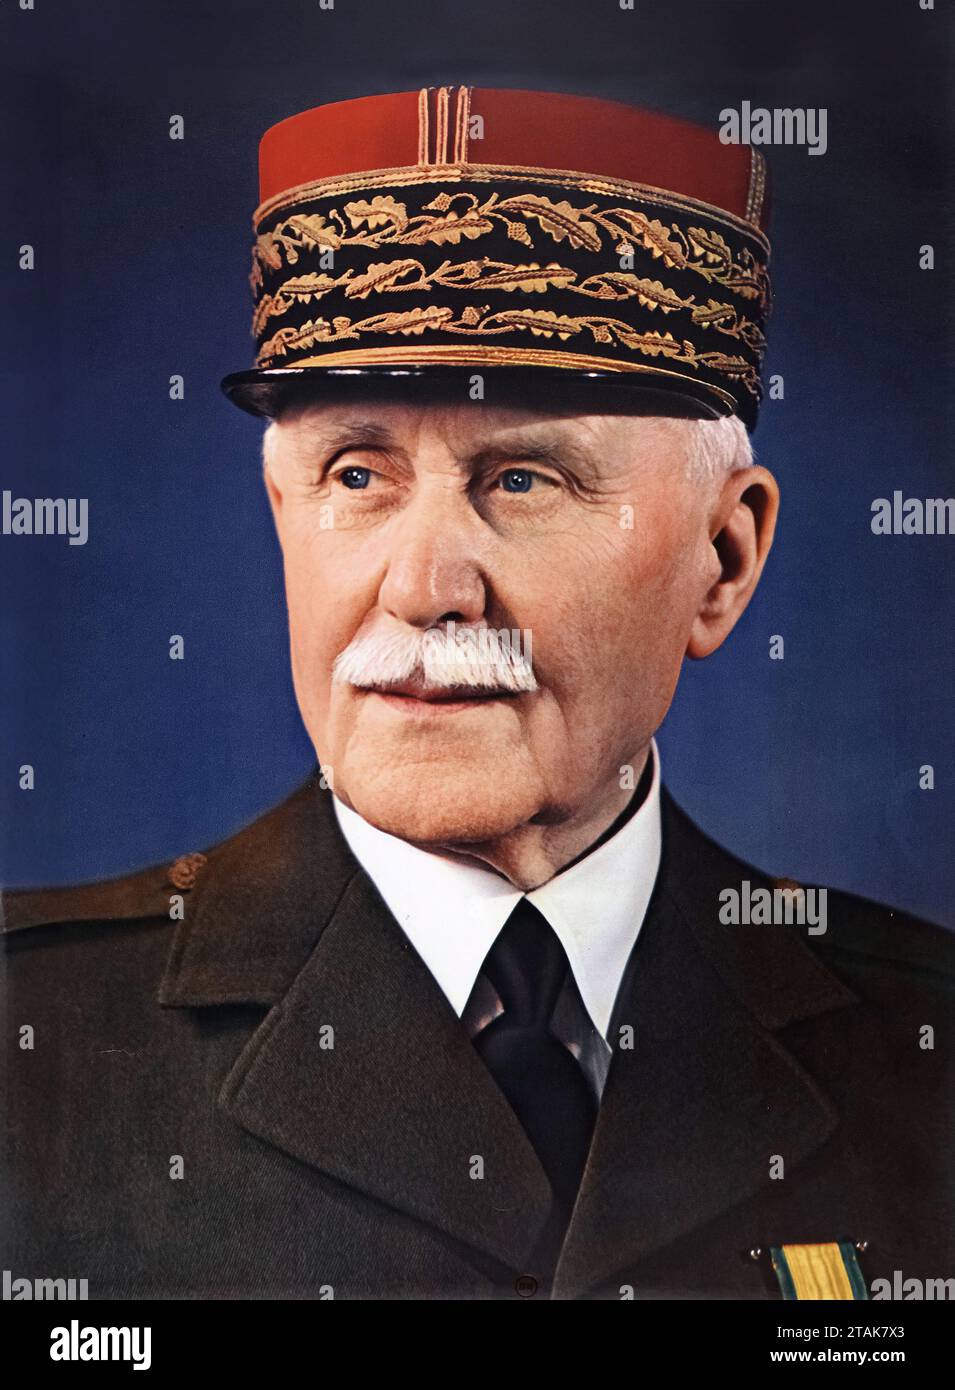 Philippe Petain. Portrait of the head of the collaborationist regime of Vichy France, Henri Philippe Benoni Omer Pétain (Marshal Petain: 1856-1951), official portrait, c. 1941 Stock Photo